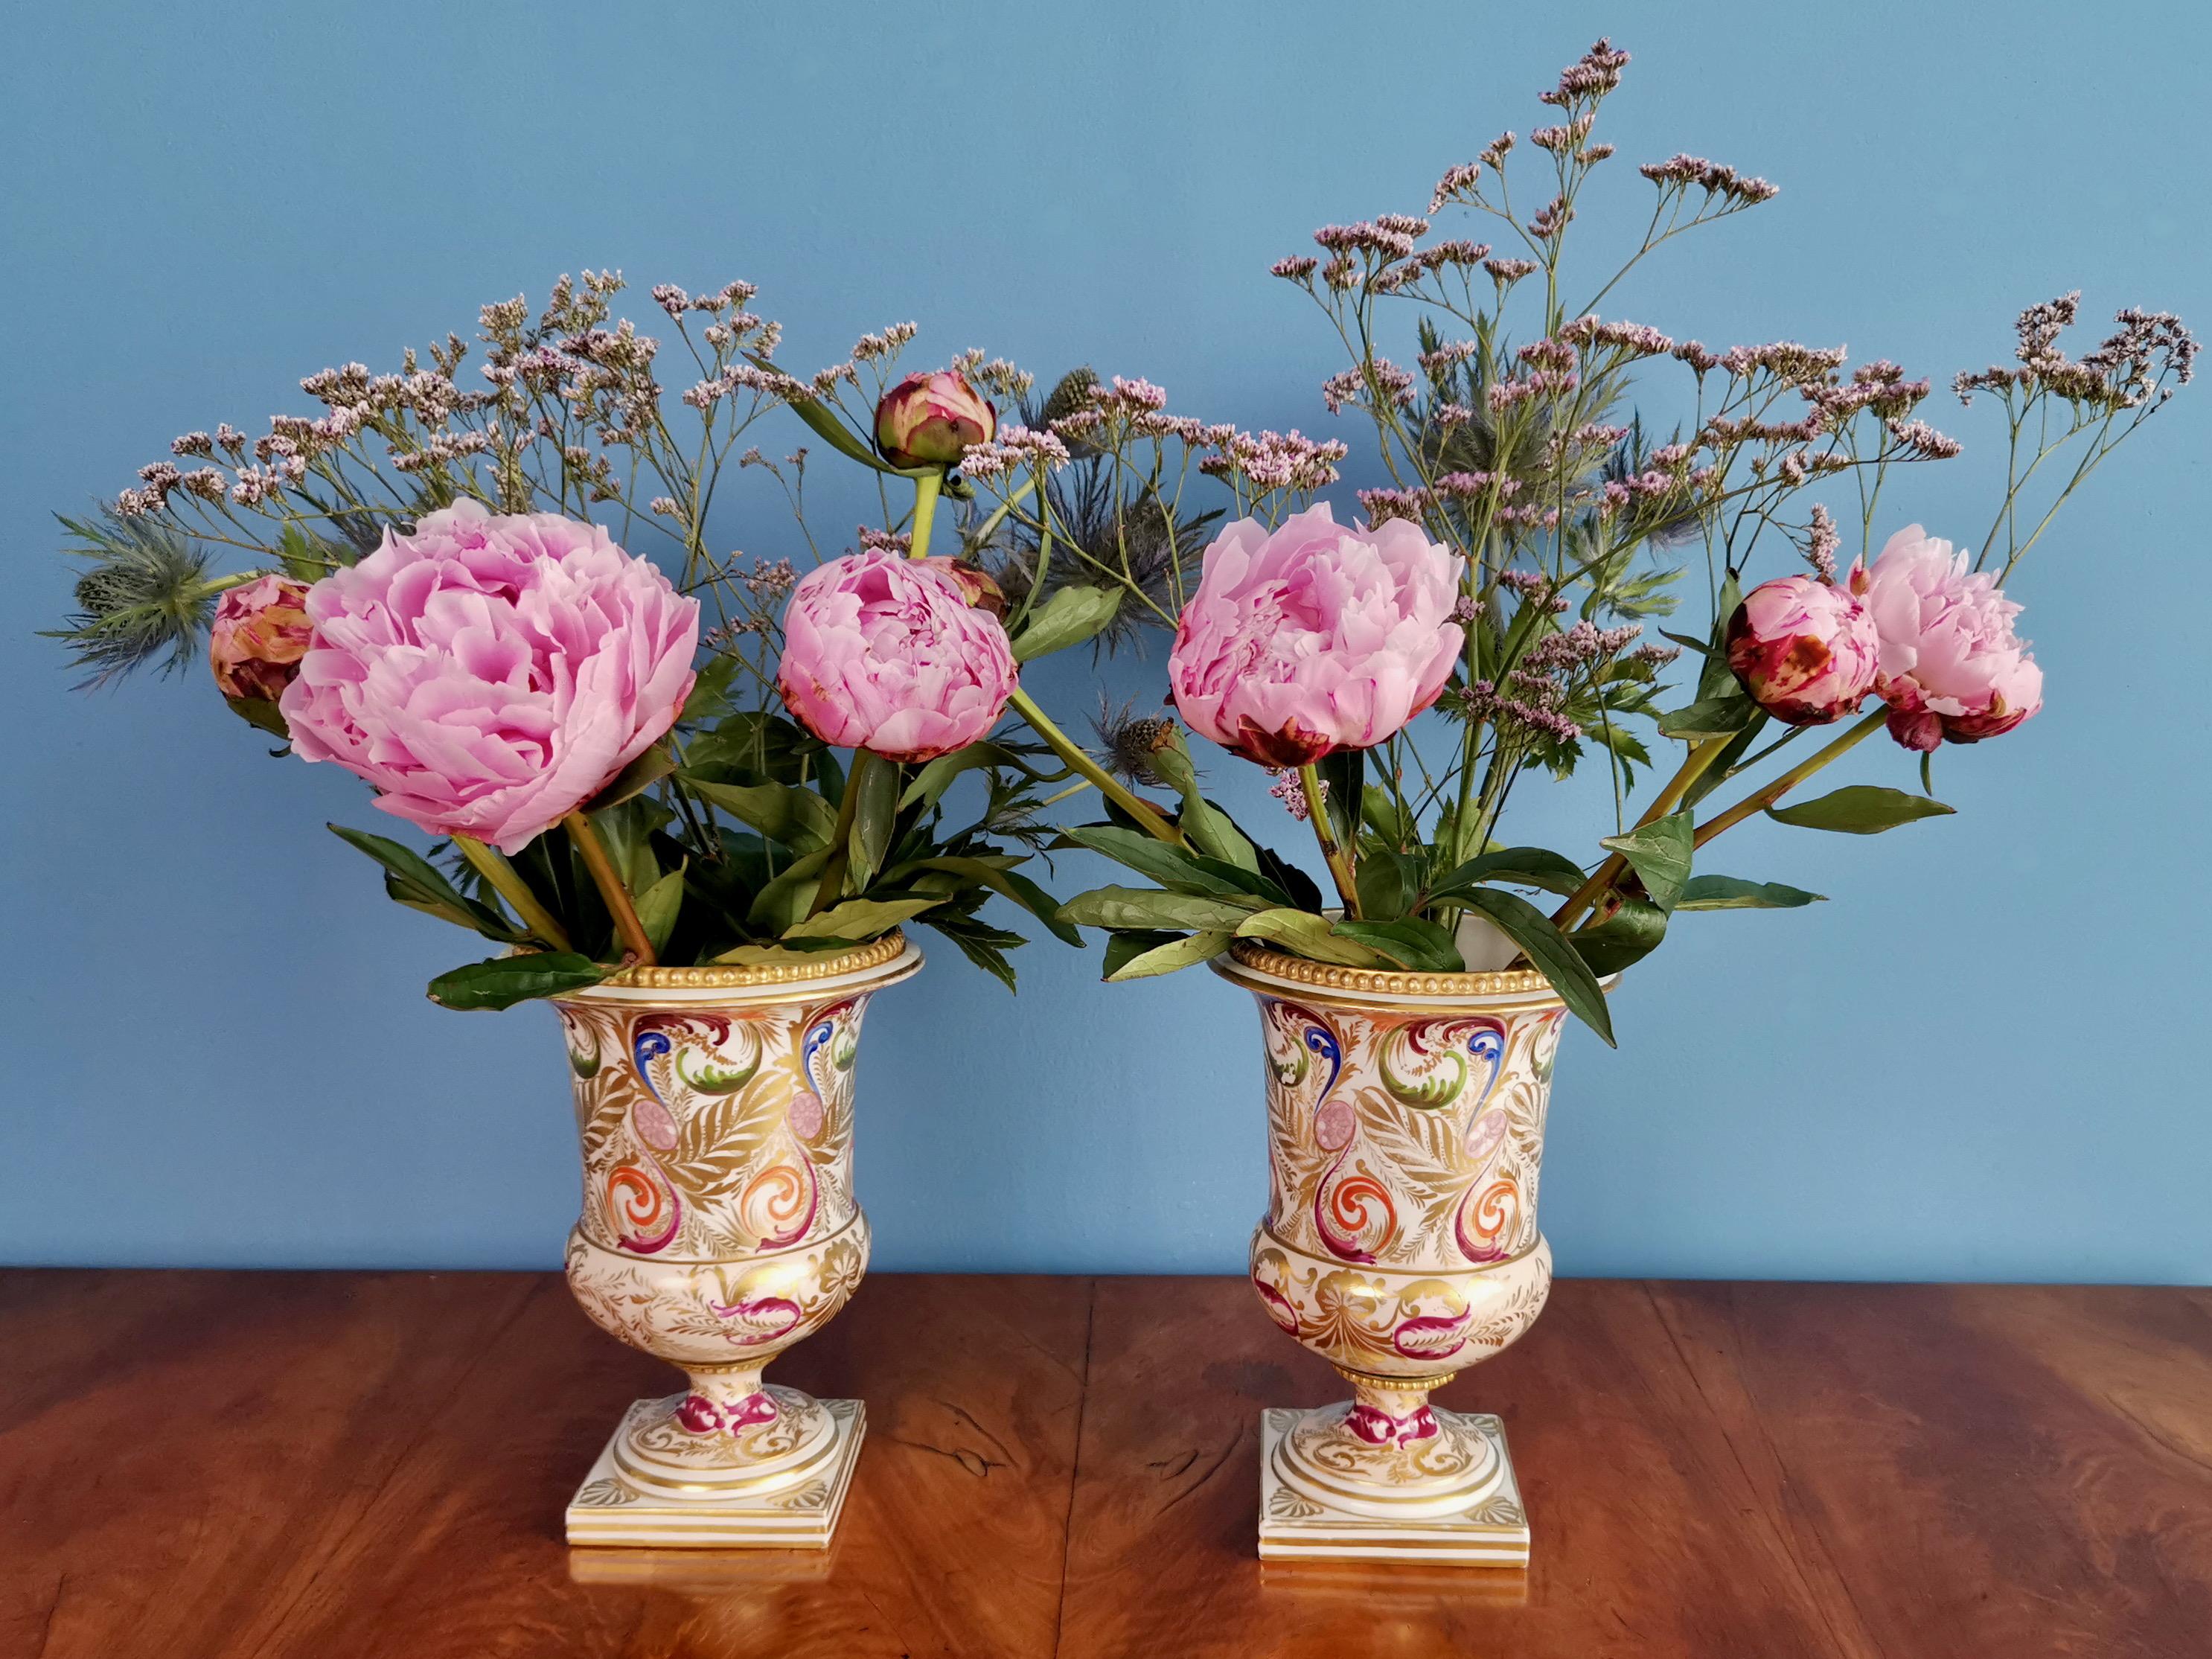 This is a stunning pair of campana vases made by Derby in about 1815, which was the Regency era. The vases have a very rare shape without handles, and are decorated with a typical Regency pattern of polychrome sprigs and gilt details.
 
The Derby